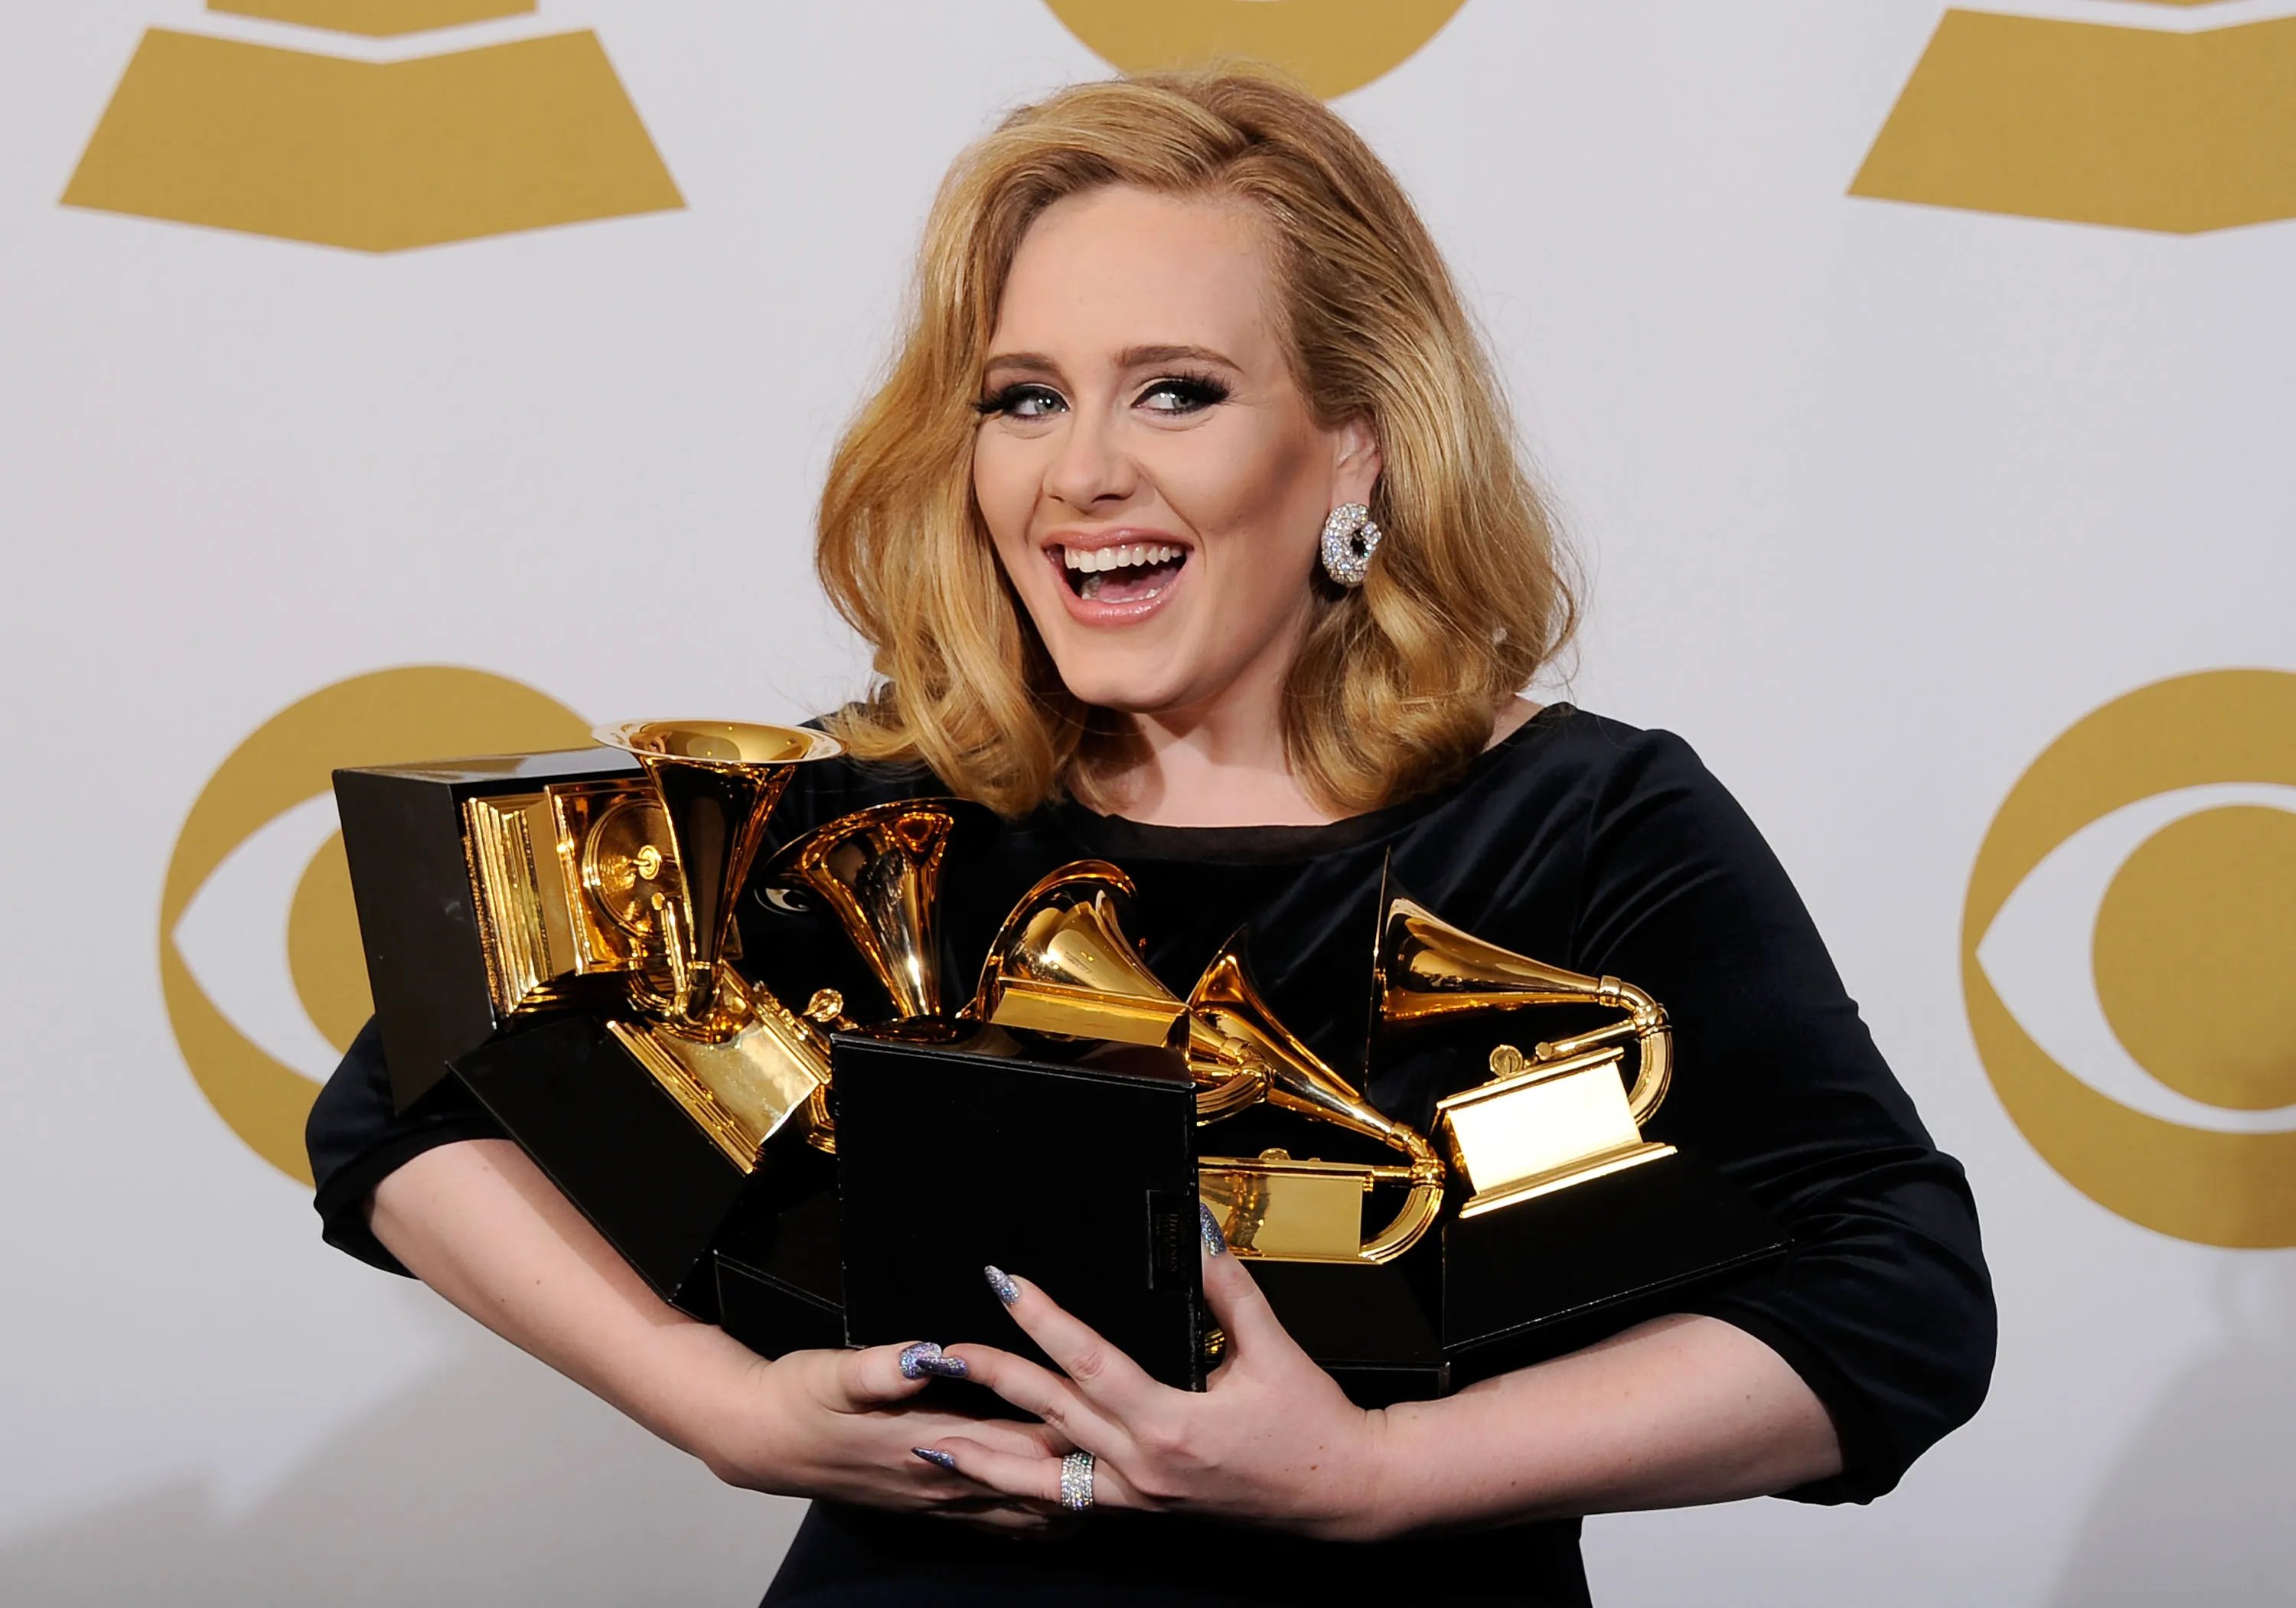 adele-2012-gettyimages-138864306